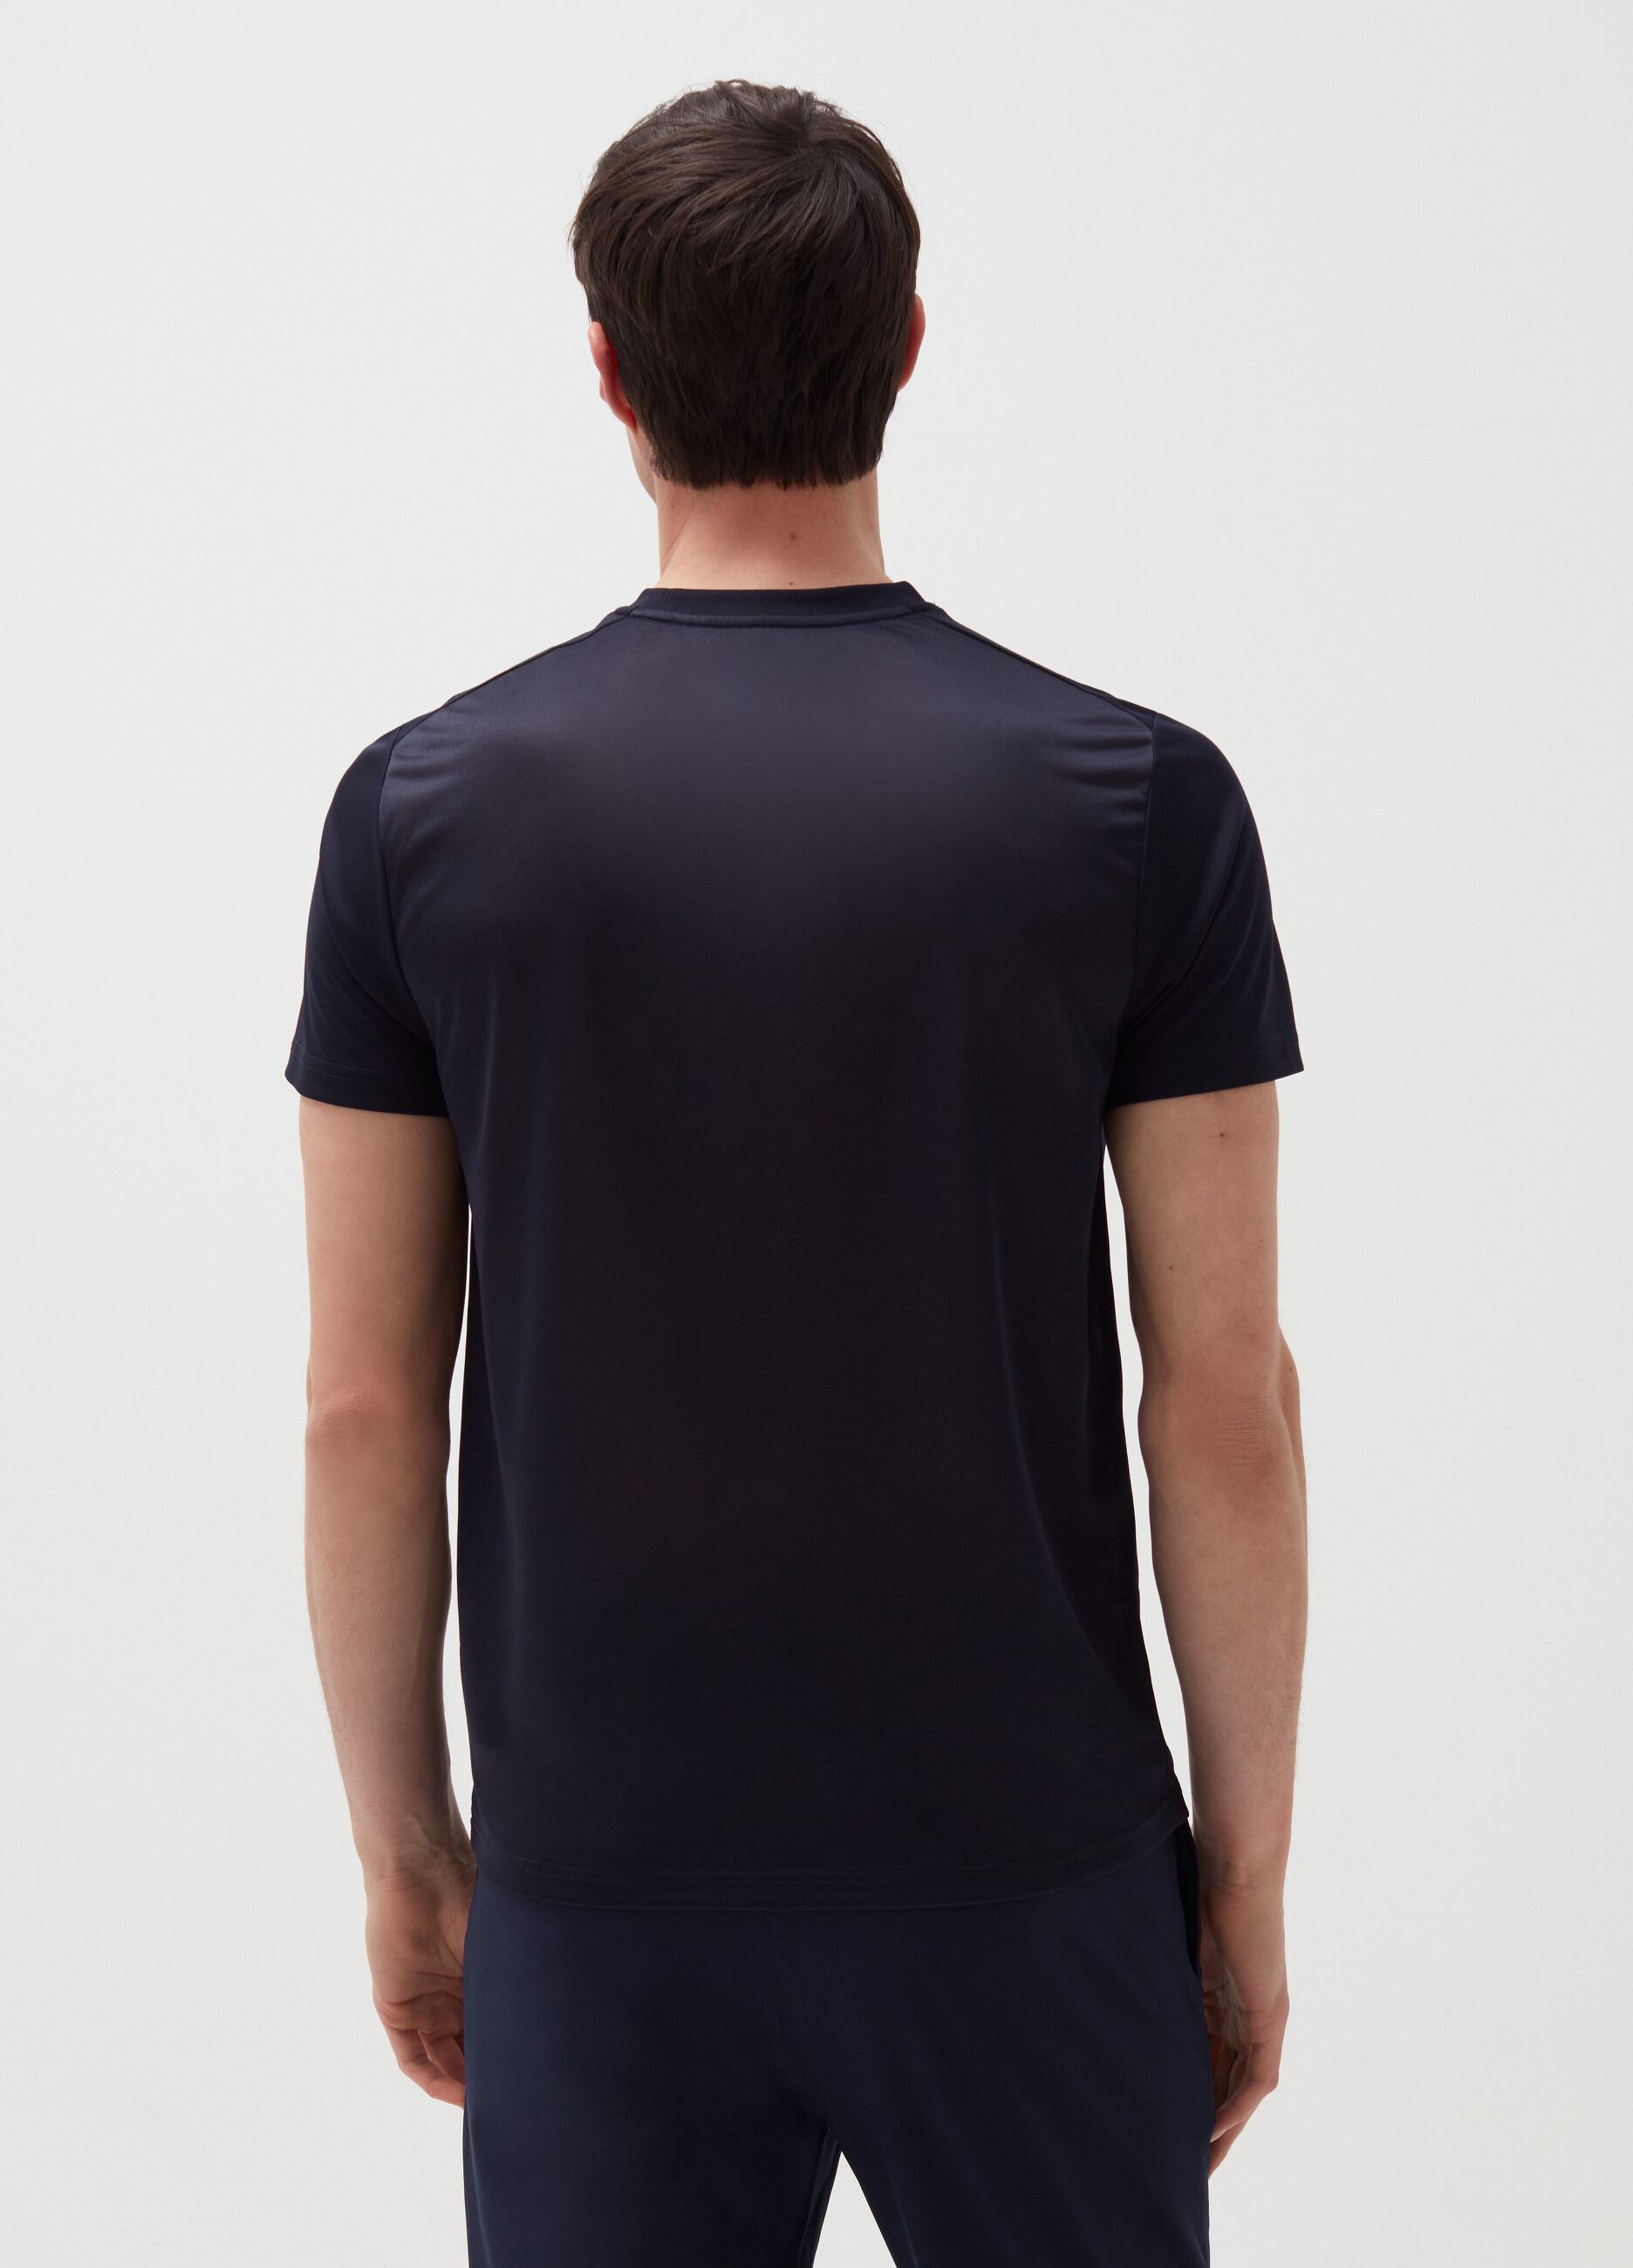 T-shirt with round neck in technical fabric